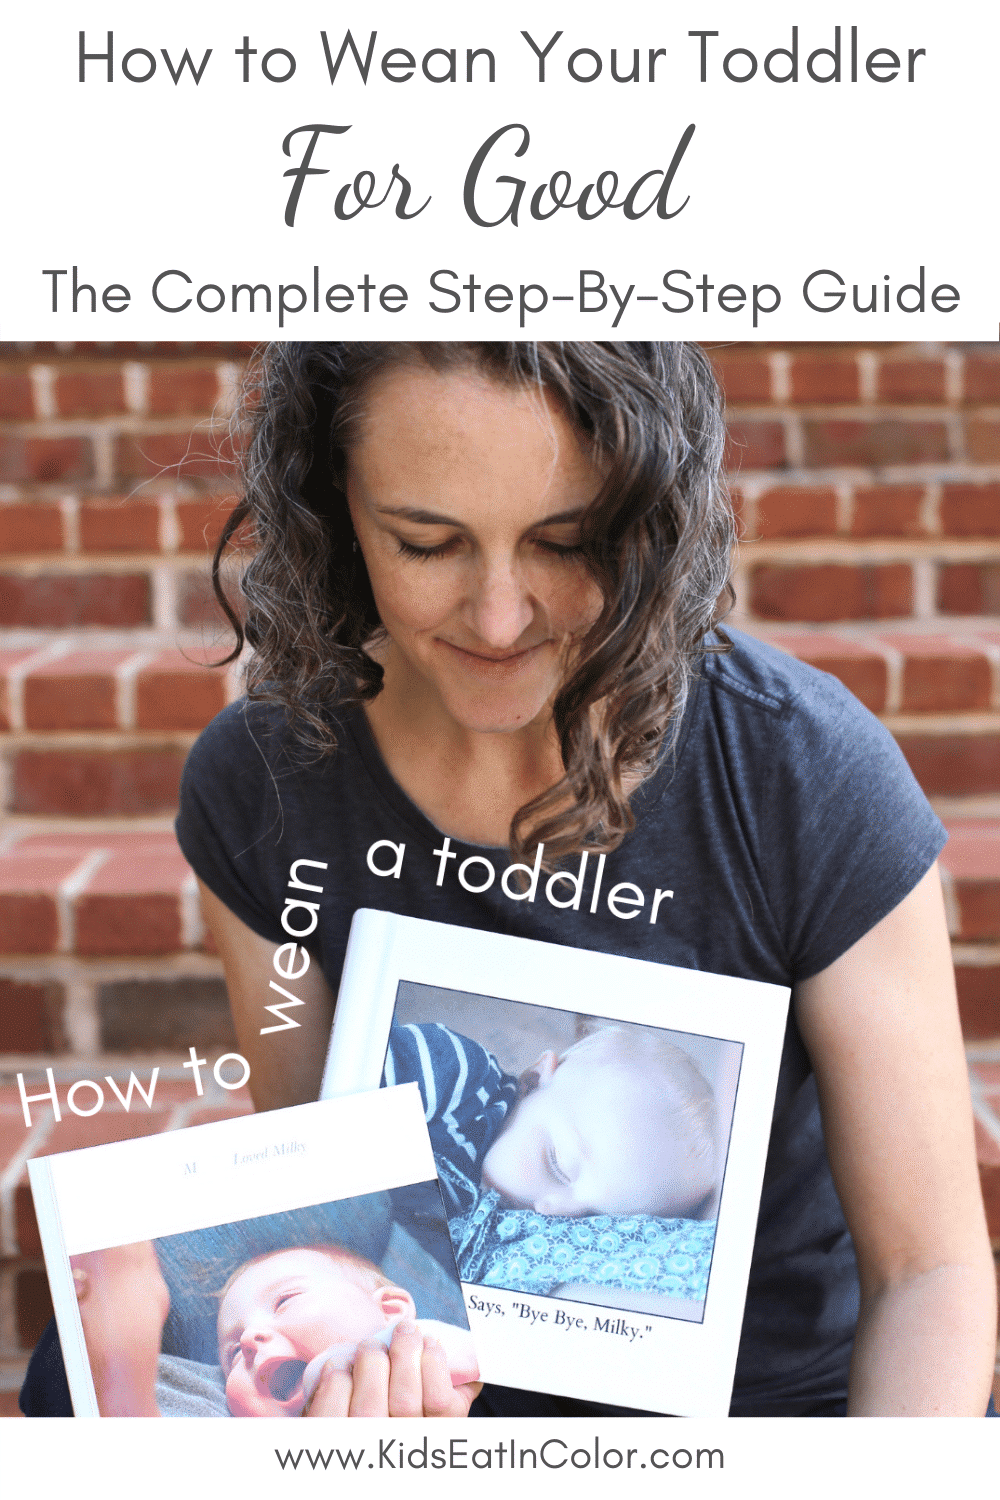 Trouble Weaning Your Toddler? How To Do It in 6 Simple Steps